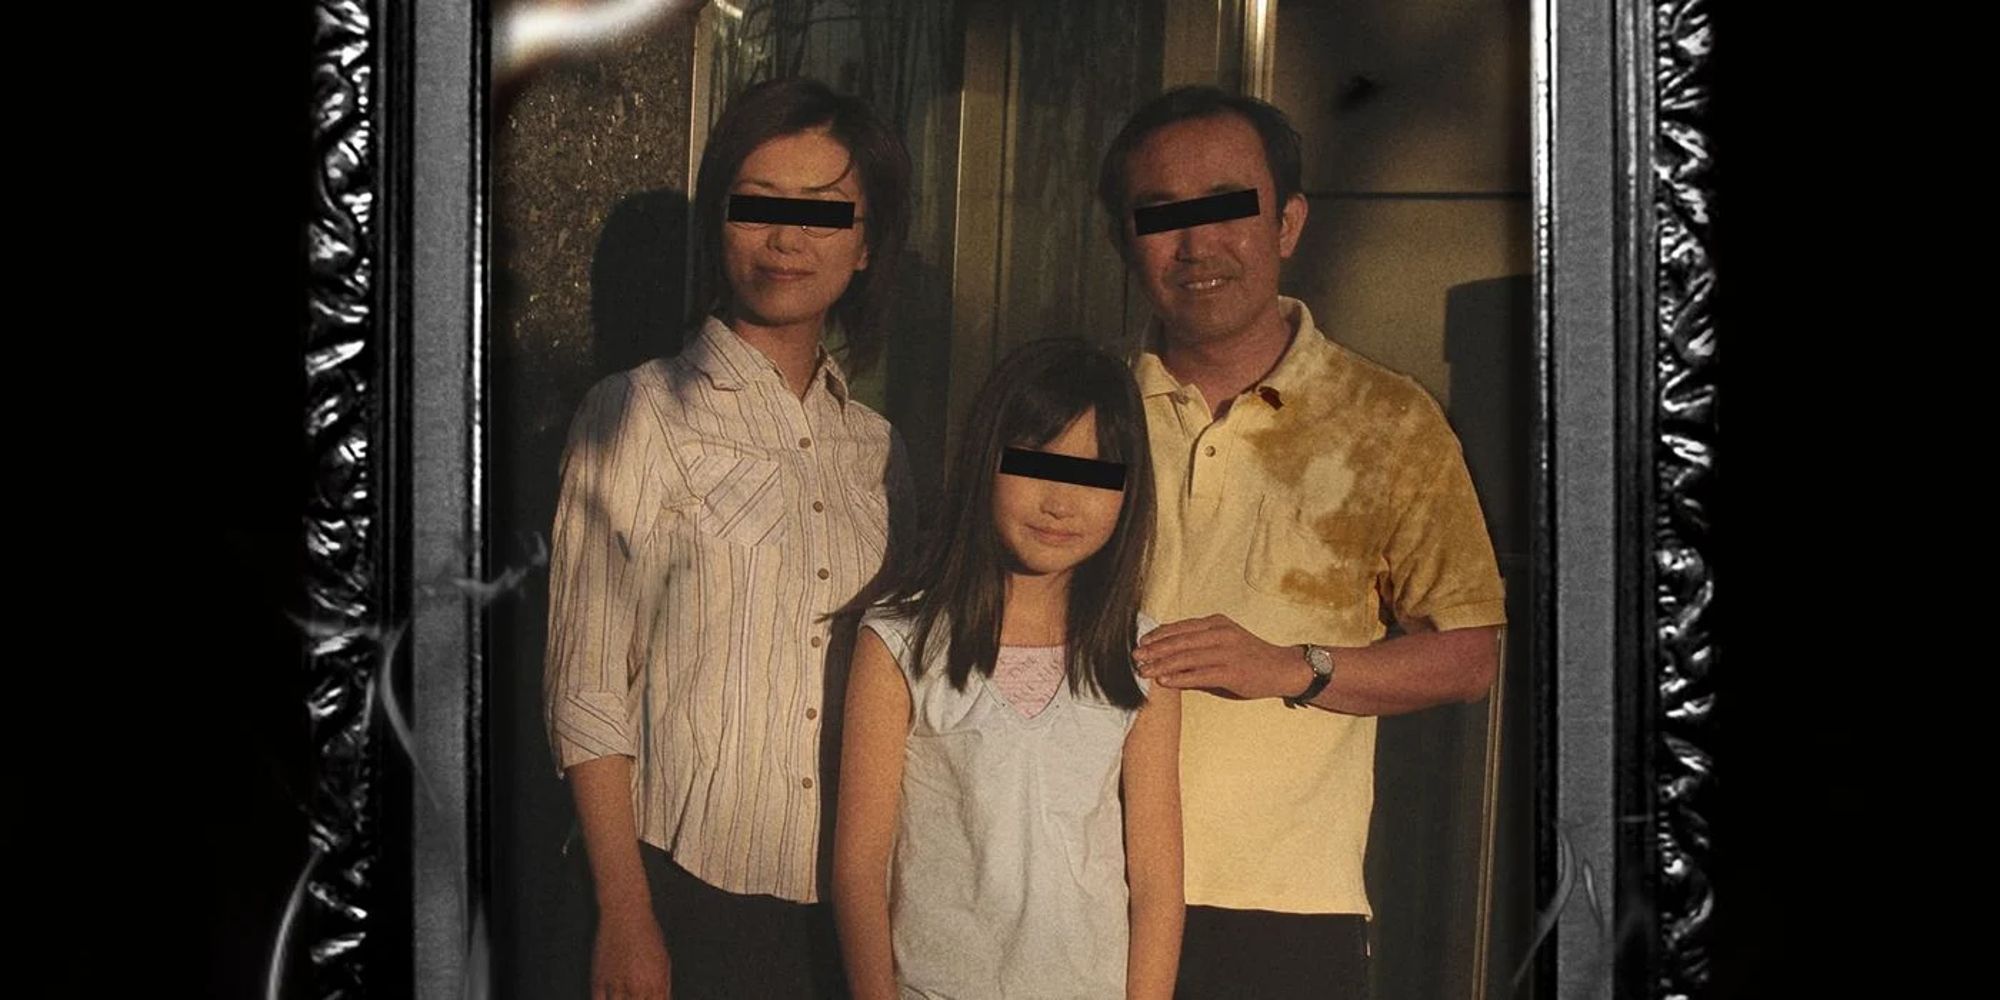 family photo of man, woman, and young girl: their eyes are censored by black bars